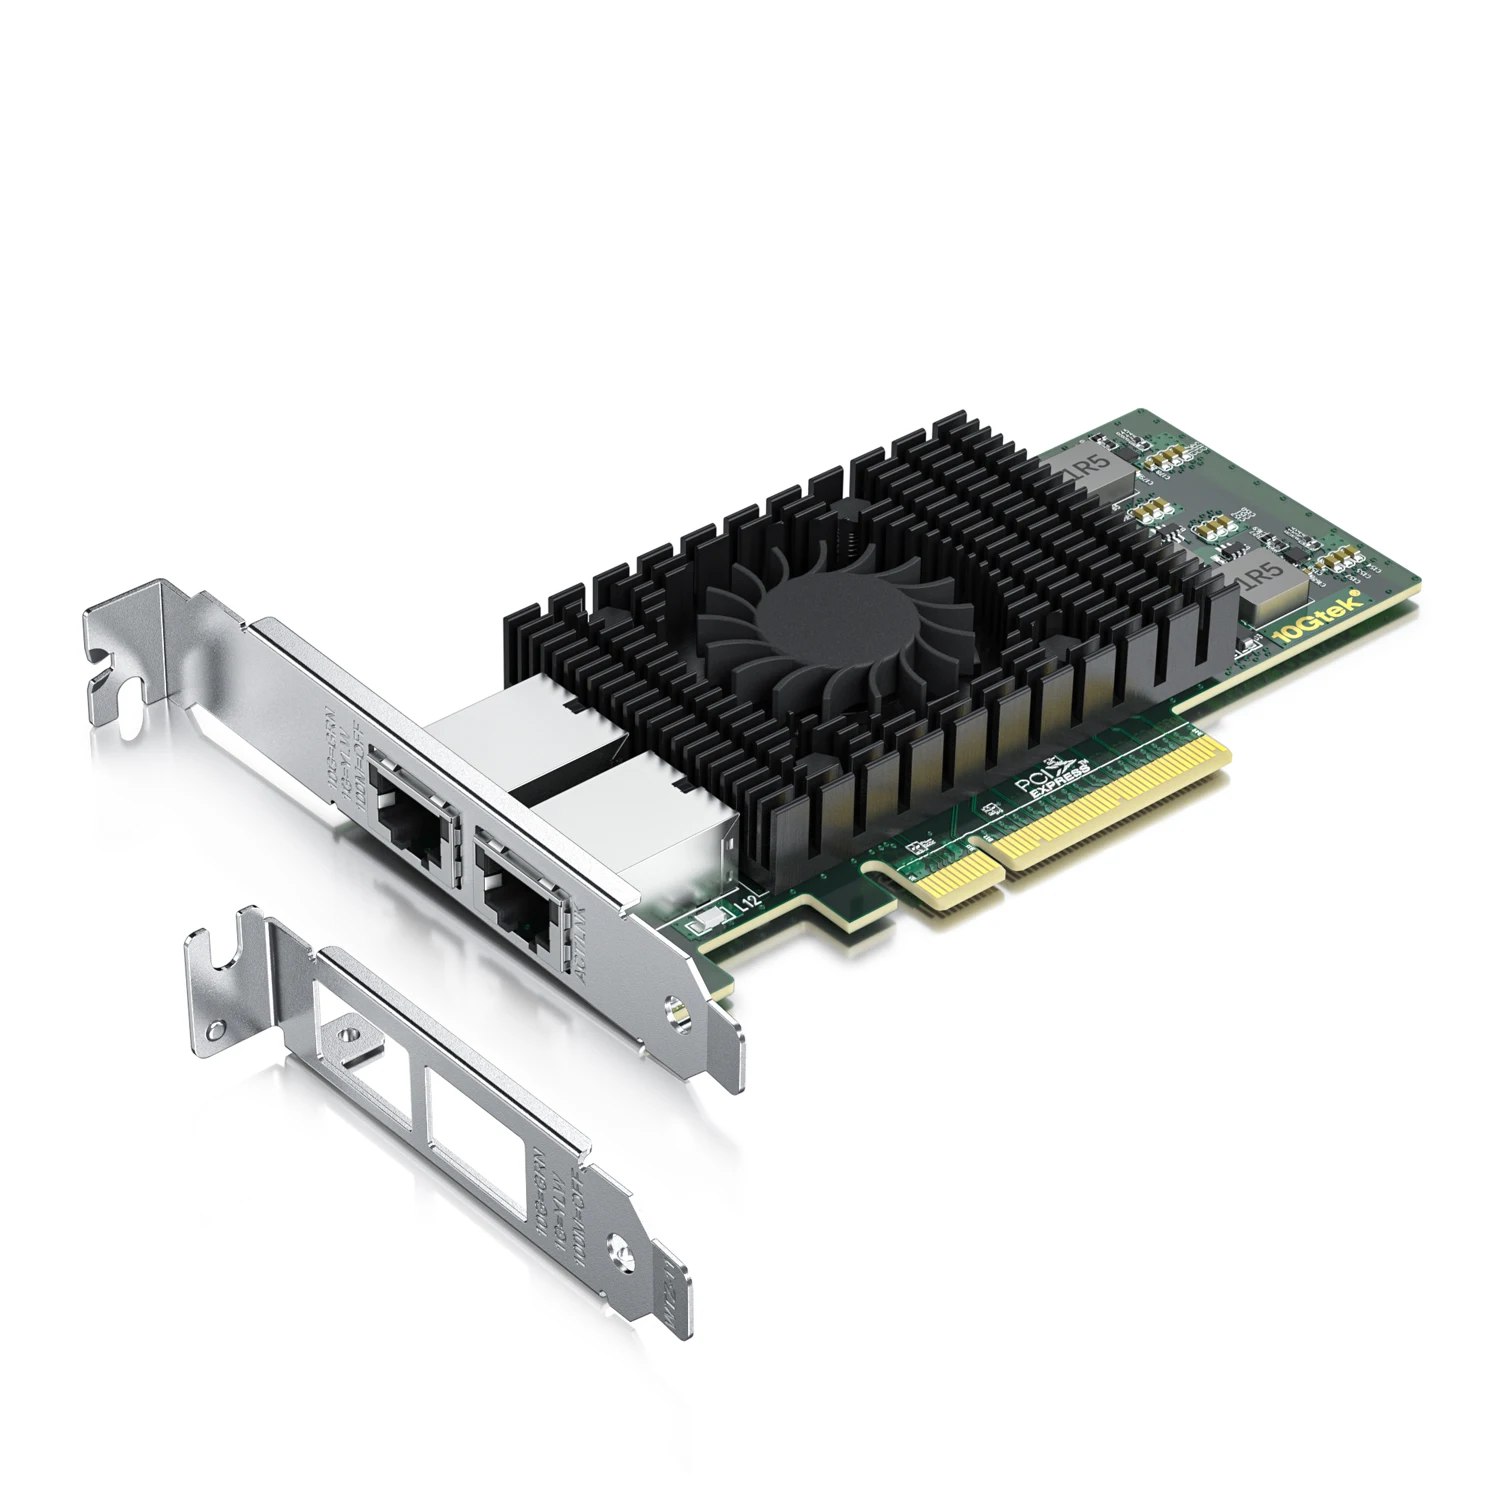 10Gb PCI-E NIC Network Card, PCI Express Ethernet LAN Adapter Support Windows Server/Windows/Linux/ESX, Compare to Intel X540-T2 10gb pci e nic network card pci express ethernet lan adapter support windows server windows linux esx compare to intel x540 t1